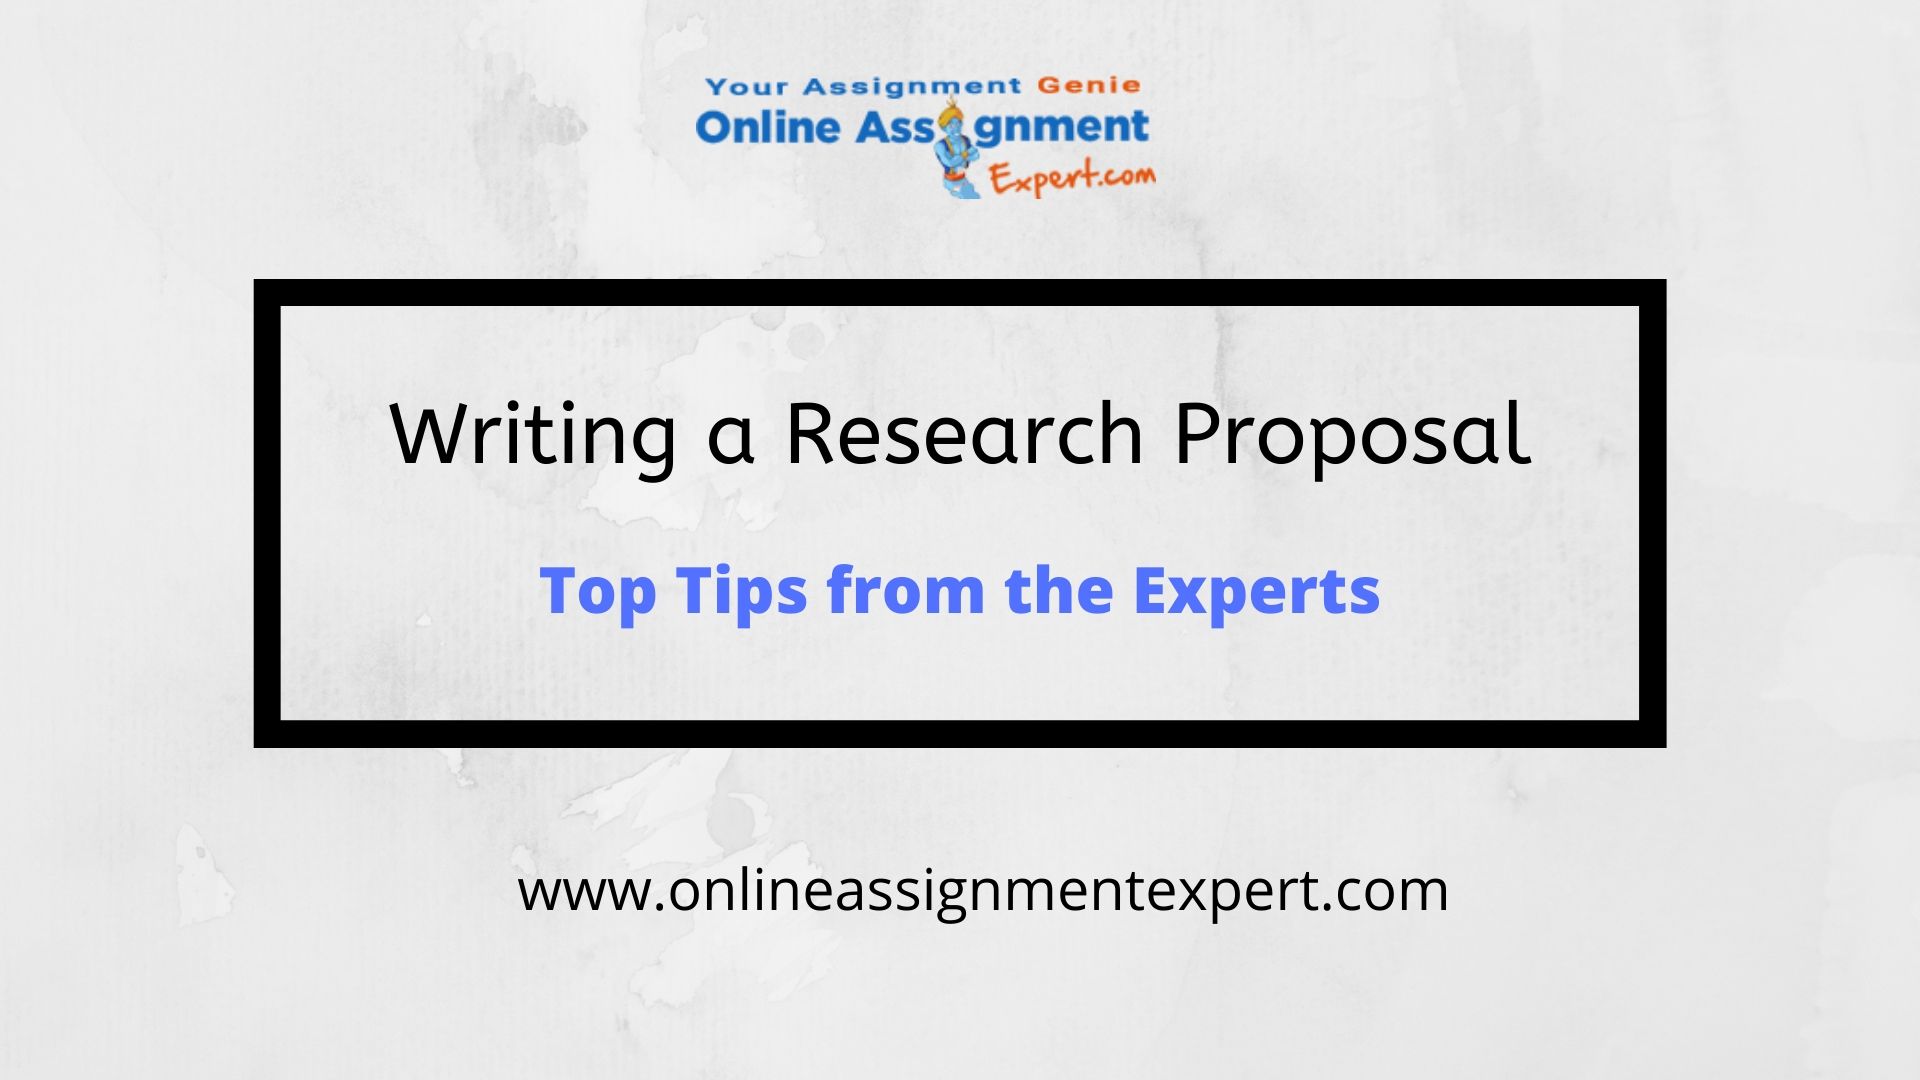 Writing a Research Proposal - Top Tips from the Experts